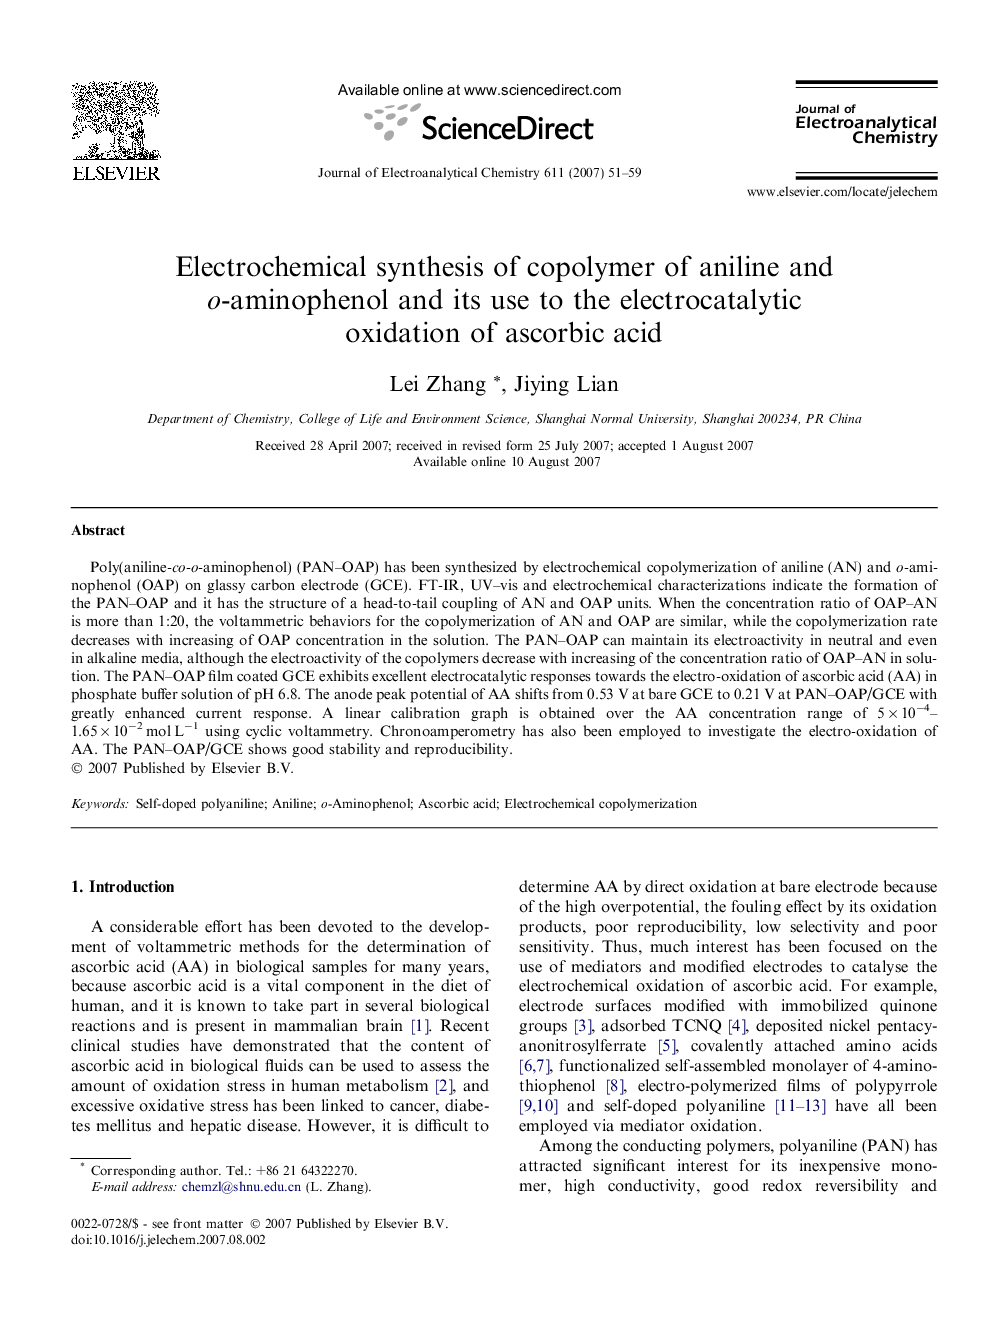 Electrochemical synthesis of copolymer of aniline and o-aminophenol and its use to the electrocatalytic oxidation of ascorbic acid